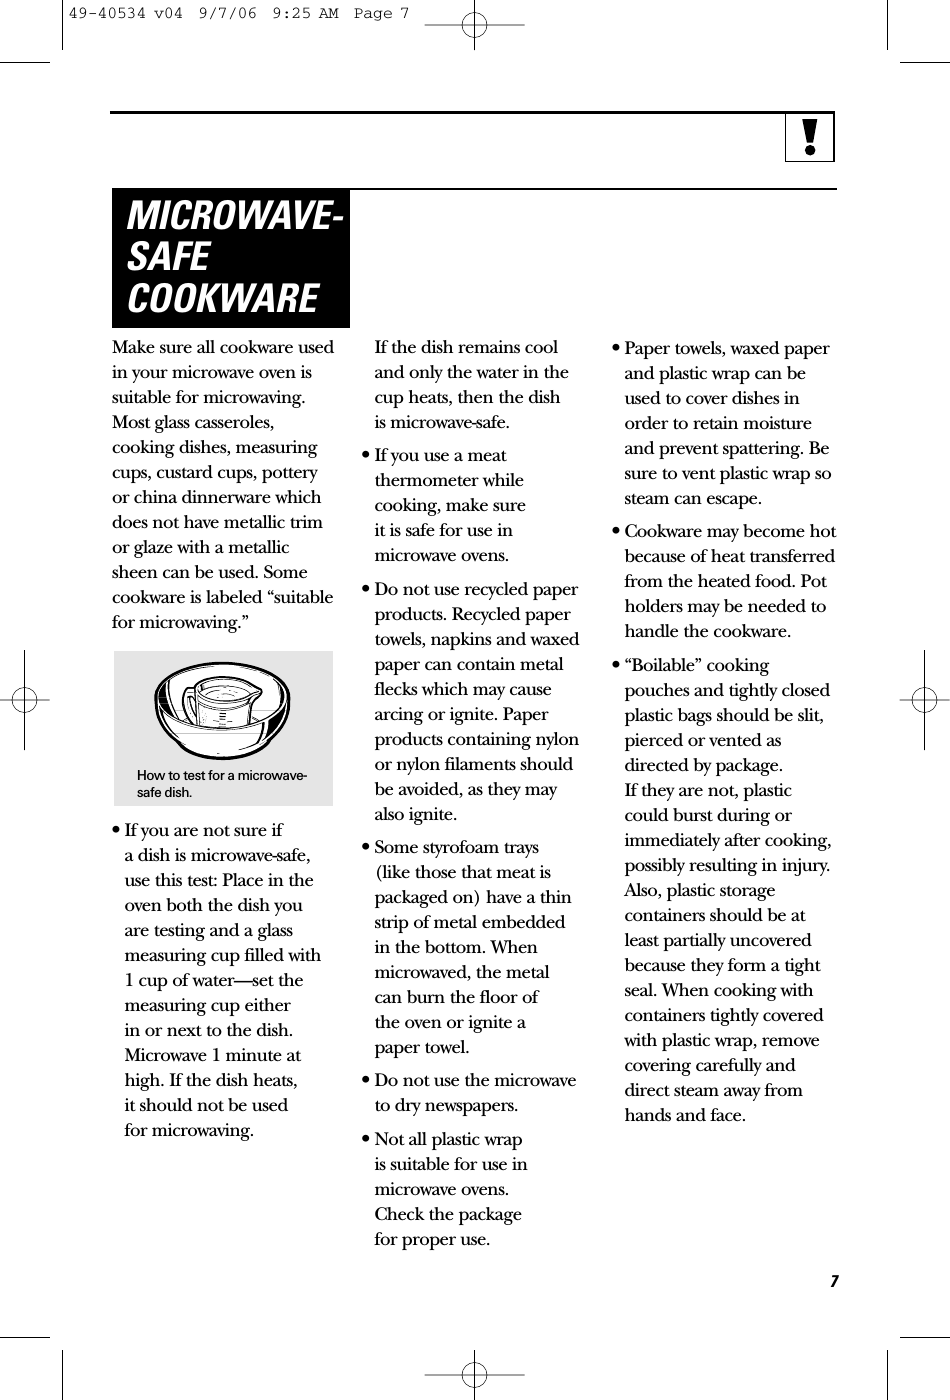 7Make sure all cookware usedin your microwave oven issuitable for microwaving.Most glass casseroles,cooking dishes, measuringcups, custard cups, potteryor china dinnerware whichdoes not have metallic trimor glaze with a metallicsheen can be used. Somecookware is labeled “suitablefor microwaving.”•If you are not sure if a dish is microwave-safe,use this test: Place in theoven both the dish you are testing and a glassmeasuring cup filled with 1 cup of water—set themeasuring cup either in or next to the dish.Microwave 1 minute athigh. If the dish heats, it should not be used for microwaving. If the dish remains cooland only the water in thecup heats, then the dish is microwave-safe.•If you use a meat thermometer whilecooking, make sure it is safe for use inmicrowave ovens.•Do not use recycled paperproducts. Recycled papertowels, napkins and waxedpaper can contain metalflecks which may causearcing or ignite. Paperproducts containing nylonor nylon filaments shouldbe avoided, as they mayalso ignite. •Some styrofoam trays (like those that meat ispackaged on) have a thinstrip of metal embedded in the bottom. Whenmicrowaved, the metal can burn the floor of the oven or ignite a paper towel.•Do not use the microwaveto dry newspapers.•Not all plastic wrap is suitable for use inmicrowave ovens. Check the package for proper use.•Paper towels, waxed paperand plastic wrap can beused to cover dishes inorder to retain moistureand prevent spattering. Besure to vent plastic wrap sosteam can escape.•Cookware may become hotbecause of heat transferredfrom the heated food. Potholders may be needed tohandle the cookware.•“Boilable” cookingpouches and tightly closedplastic bags should be slit,pierced or vented asdirected by package. If they are not, plasticcould burst during orimmediately after cooking,possibly resulting in injury.Also, plastic storagecontainers should be atleast partially uncoveredbecause they form a tightseal. When cooking withcontainers tightly coveredwith plastic wrap, removecovering carefully anddirect steam away fromhands and face.MICROWAVE-SAFECOOKWAREHow to test for a microwave-safe dish.49-40534 v04  9/7/06  9:25 AM  Page 7